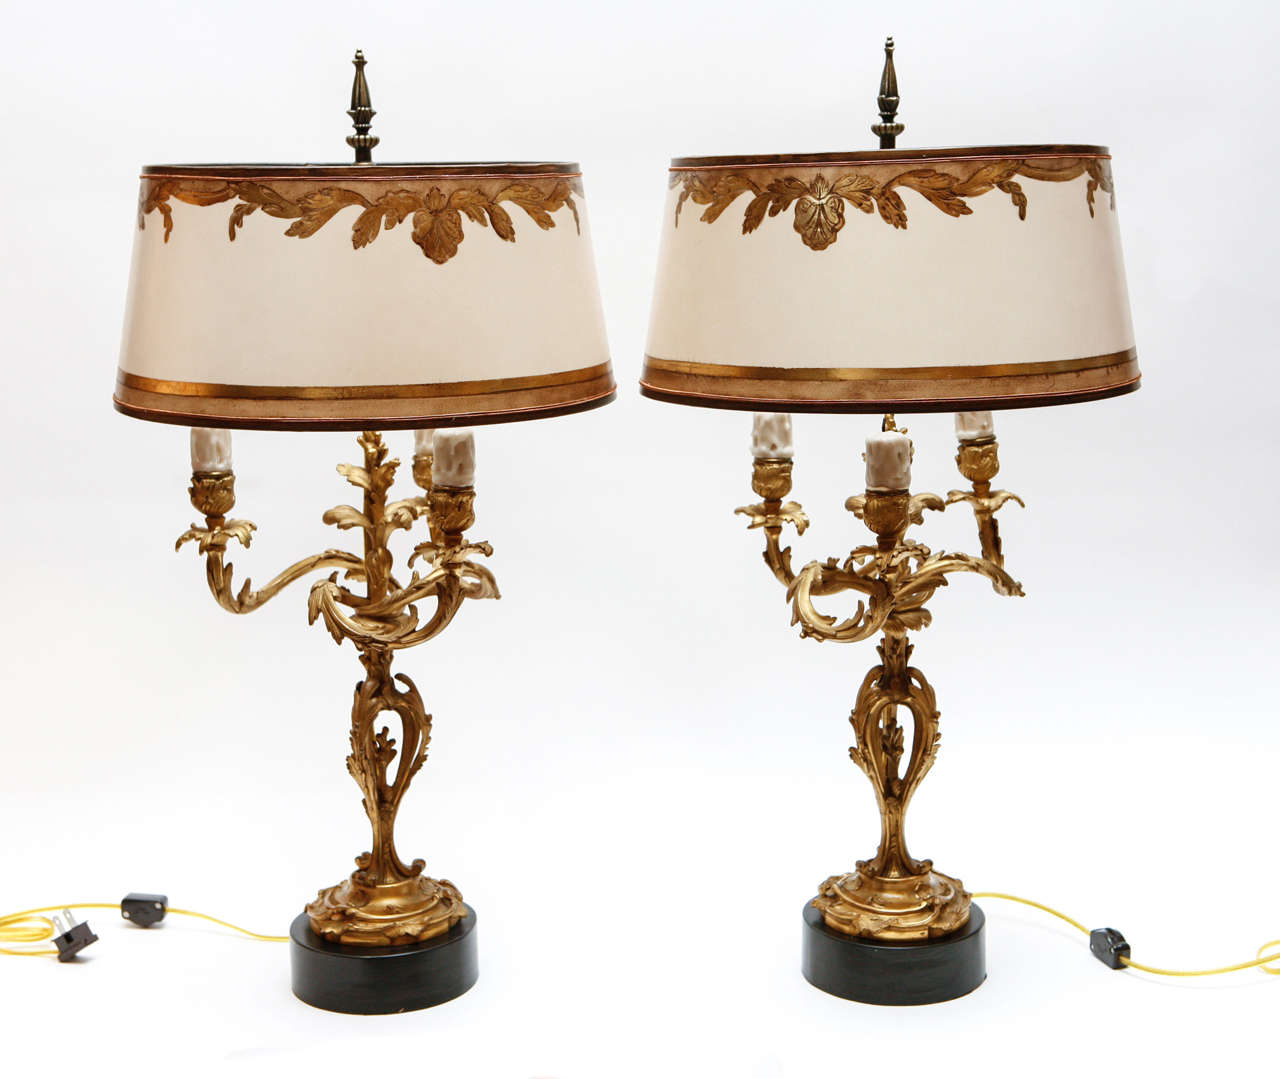 Pair of 19th c. French Candelabras that have been converted to lamps.  They are Dore Bronze with very fine chasing. The Shades are included and are Hand Made of Parchment Paper. They are Hand Gilded and Decorated. The lamps have been newly wired.